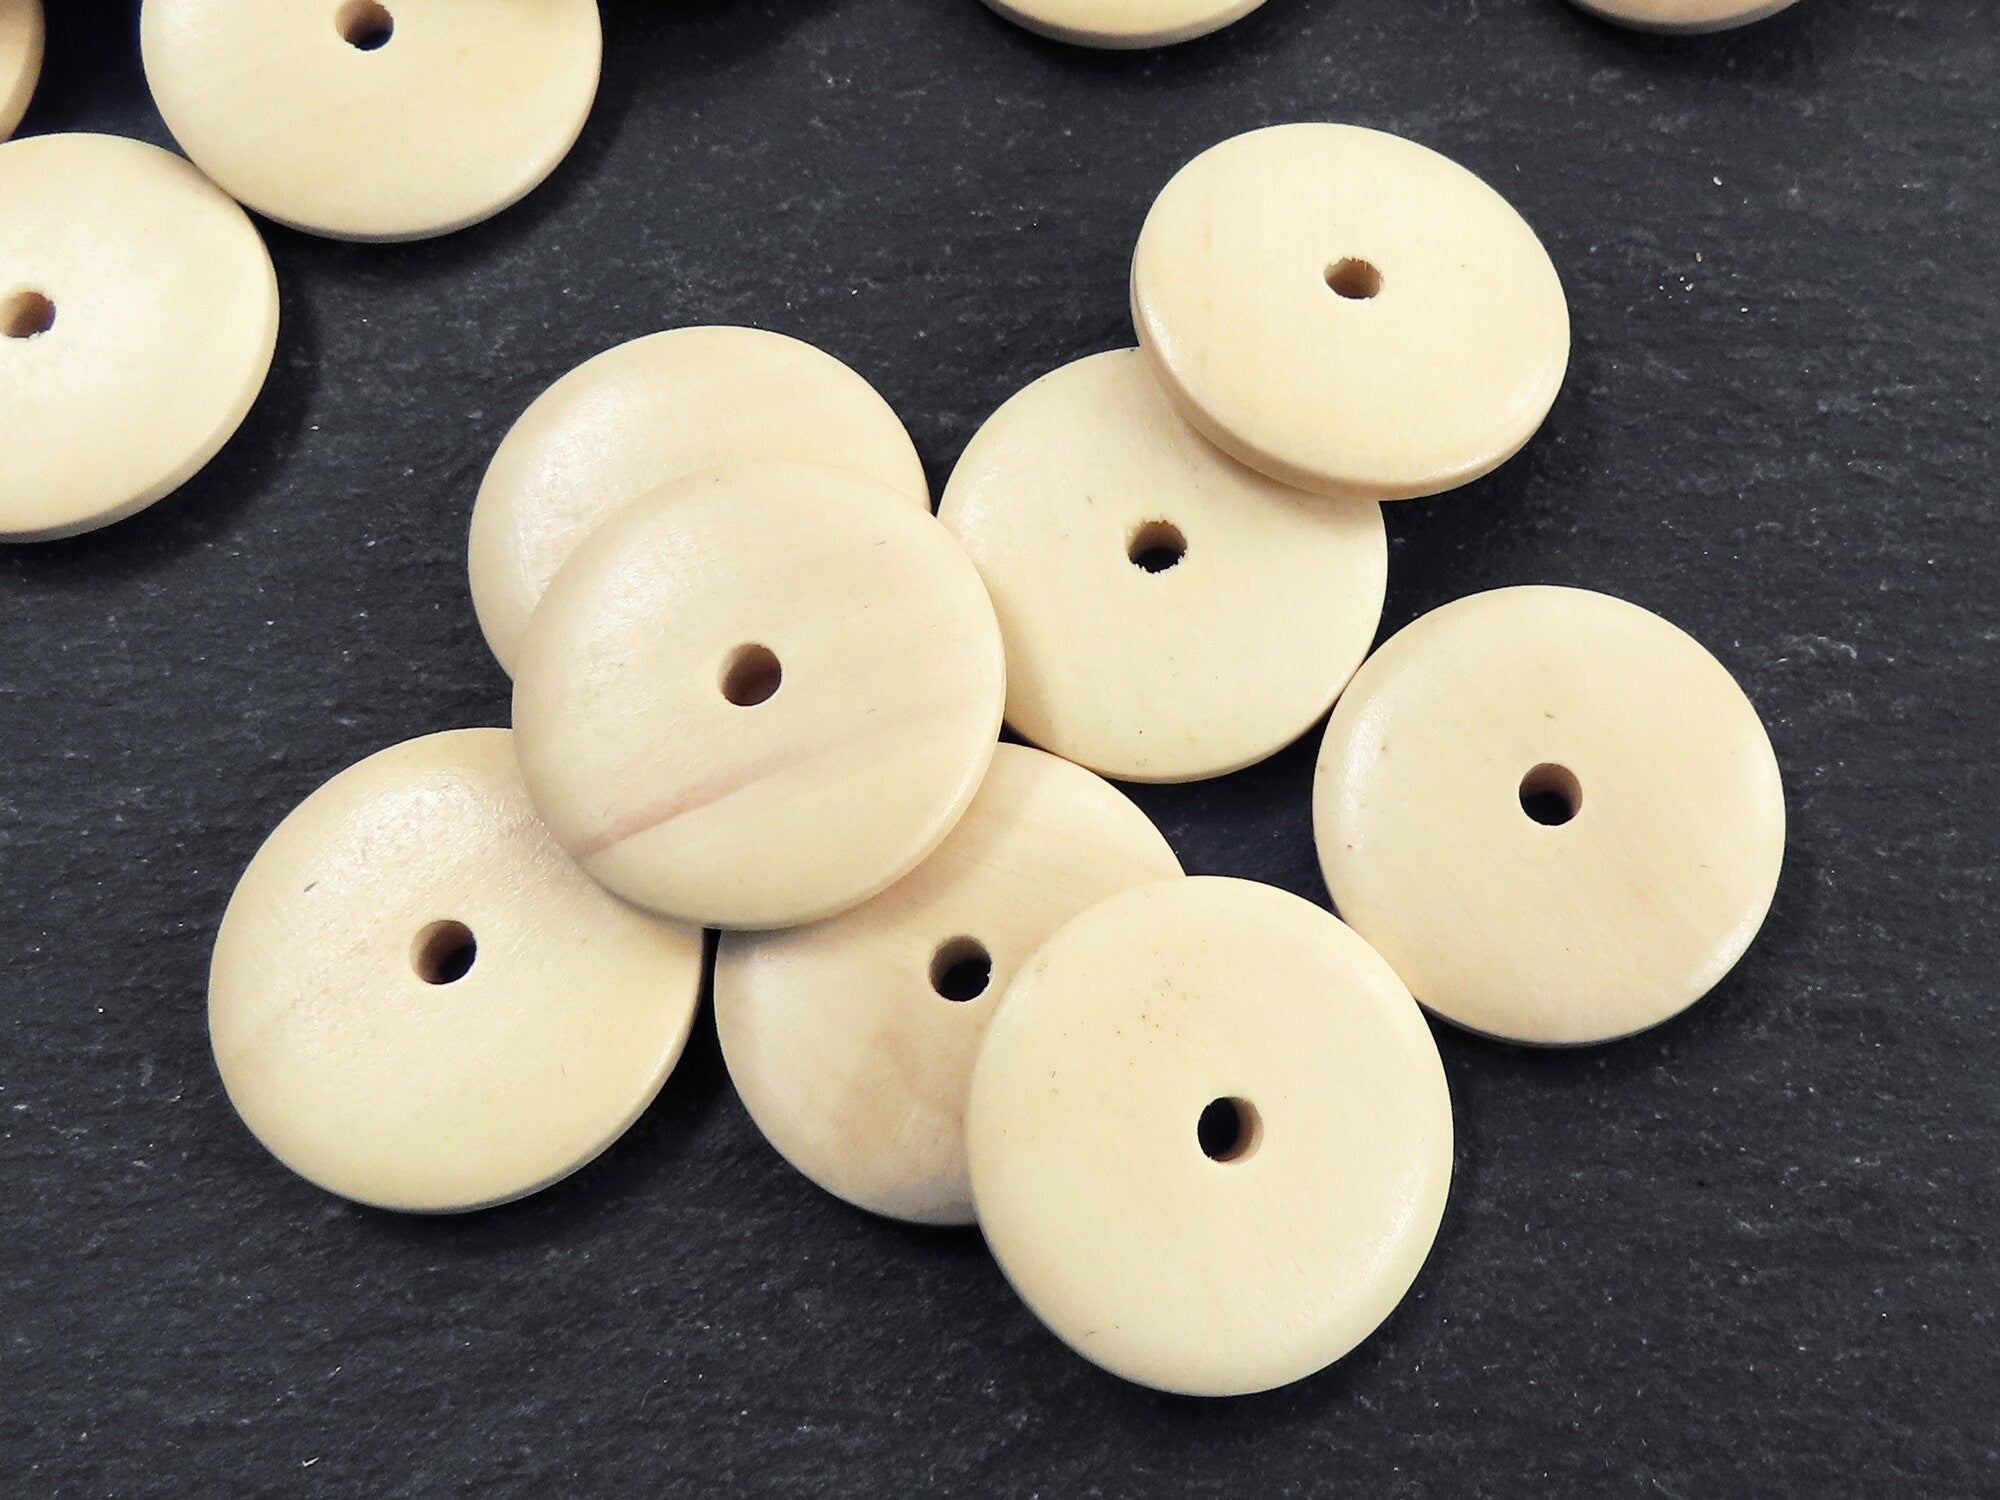  BigOtters Wood Beads, 25mm 1Inch Natural Round Wooden